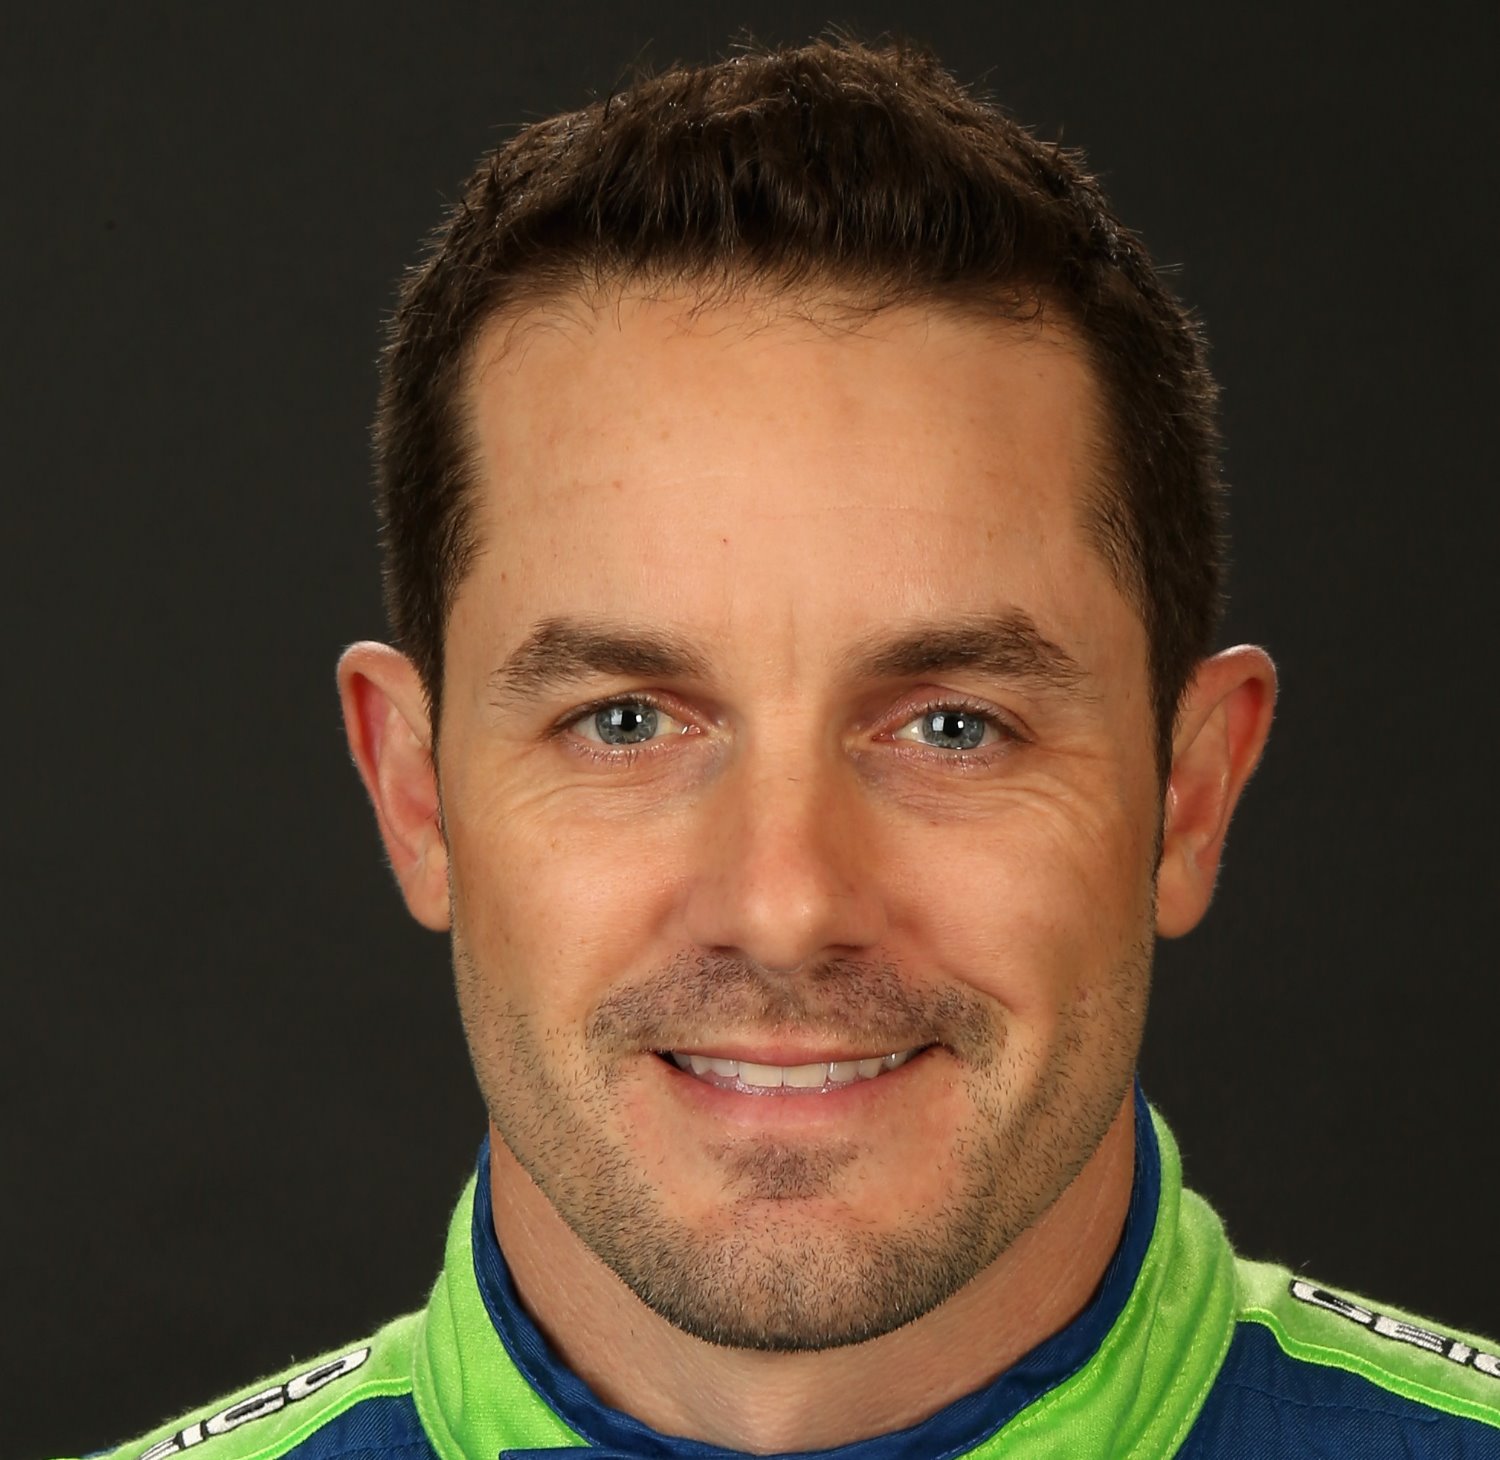 Former open wheeler Casey Mears wasted his career in NASCAR